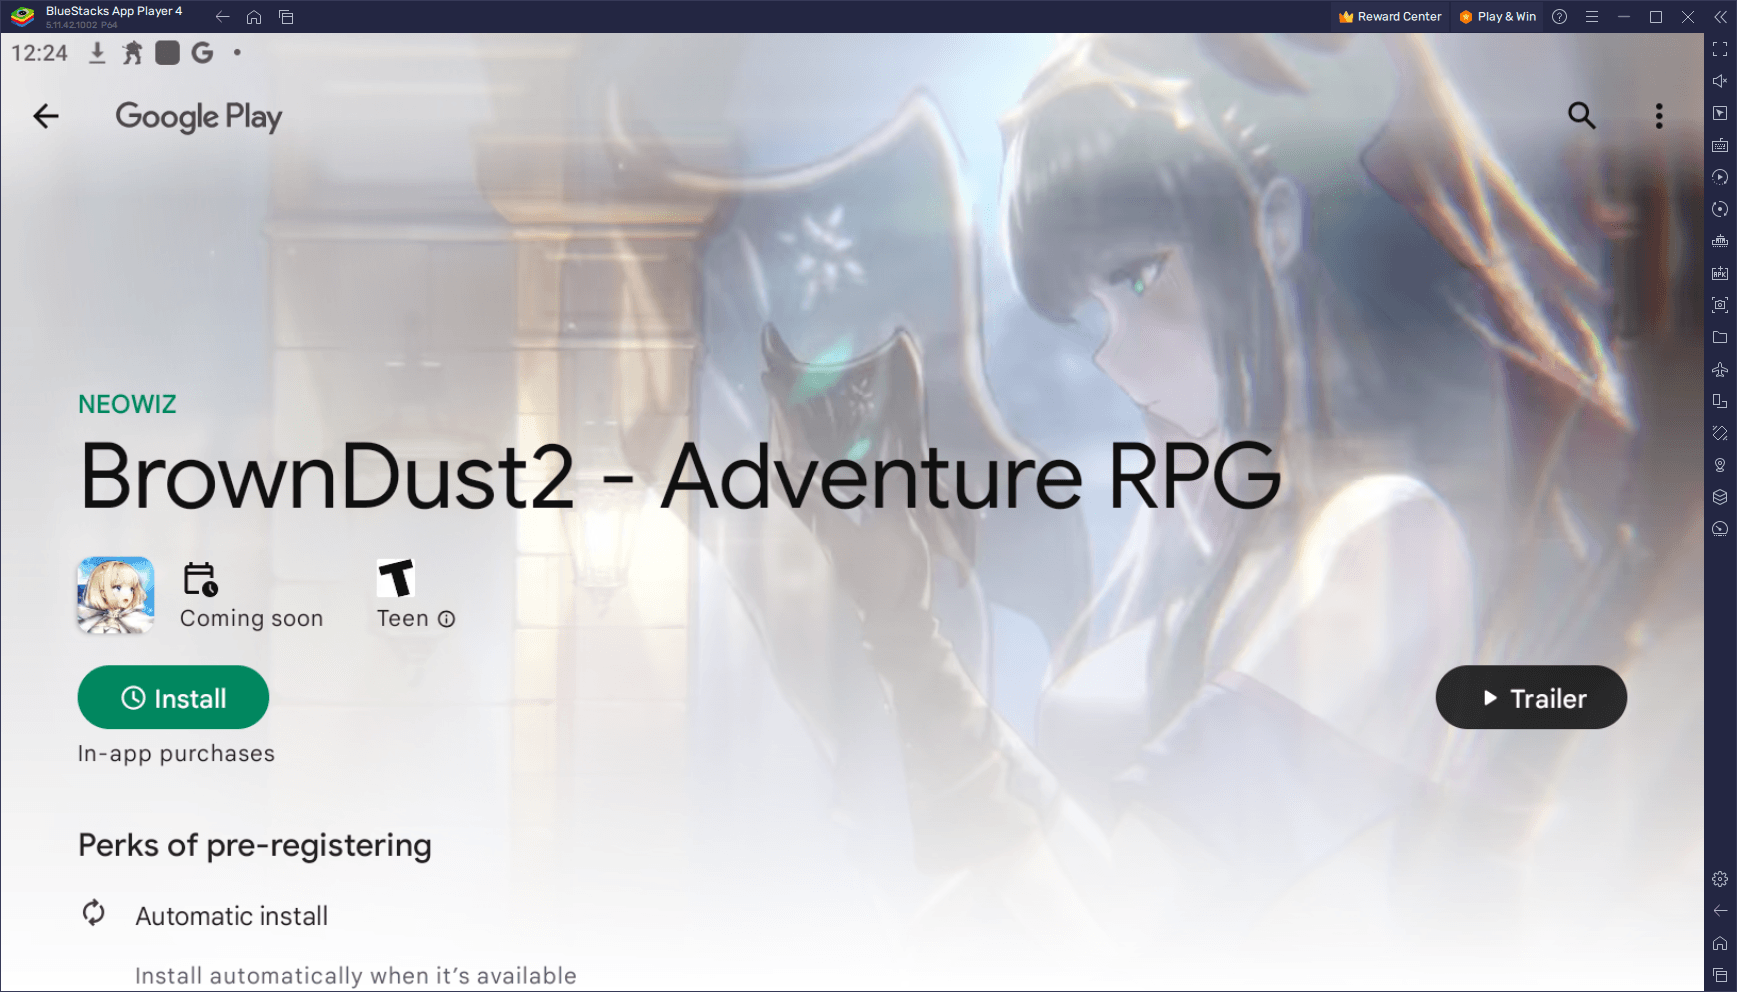 How to Play BrownDust2 - Adventure RPG on PC with BlueStacks